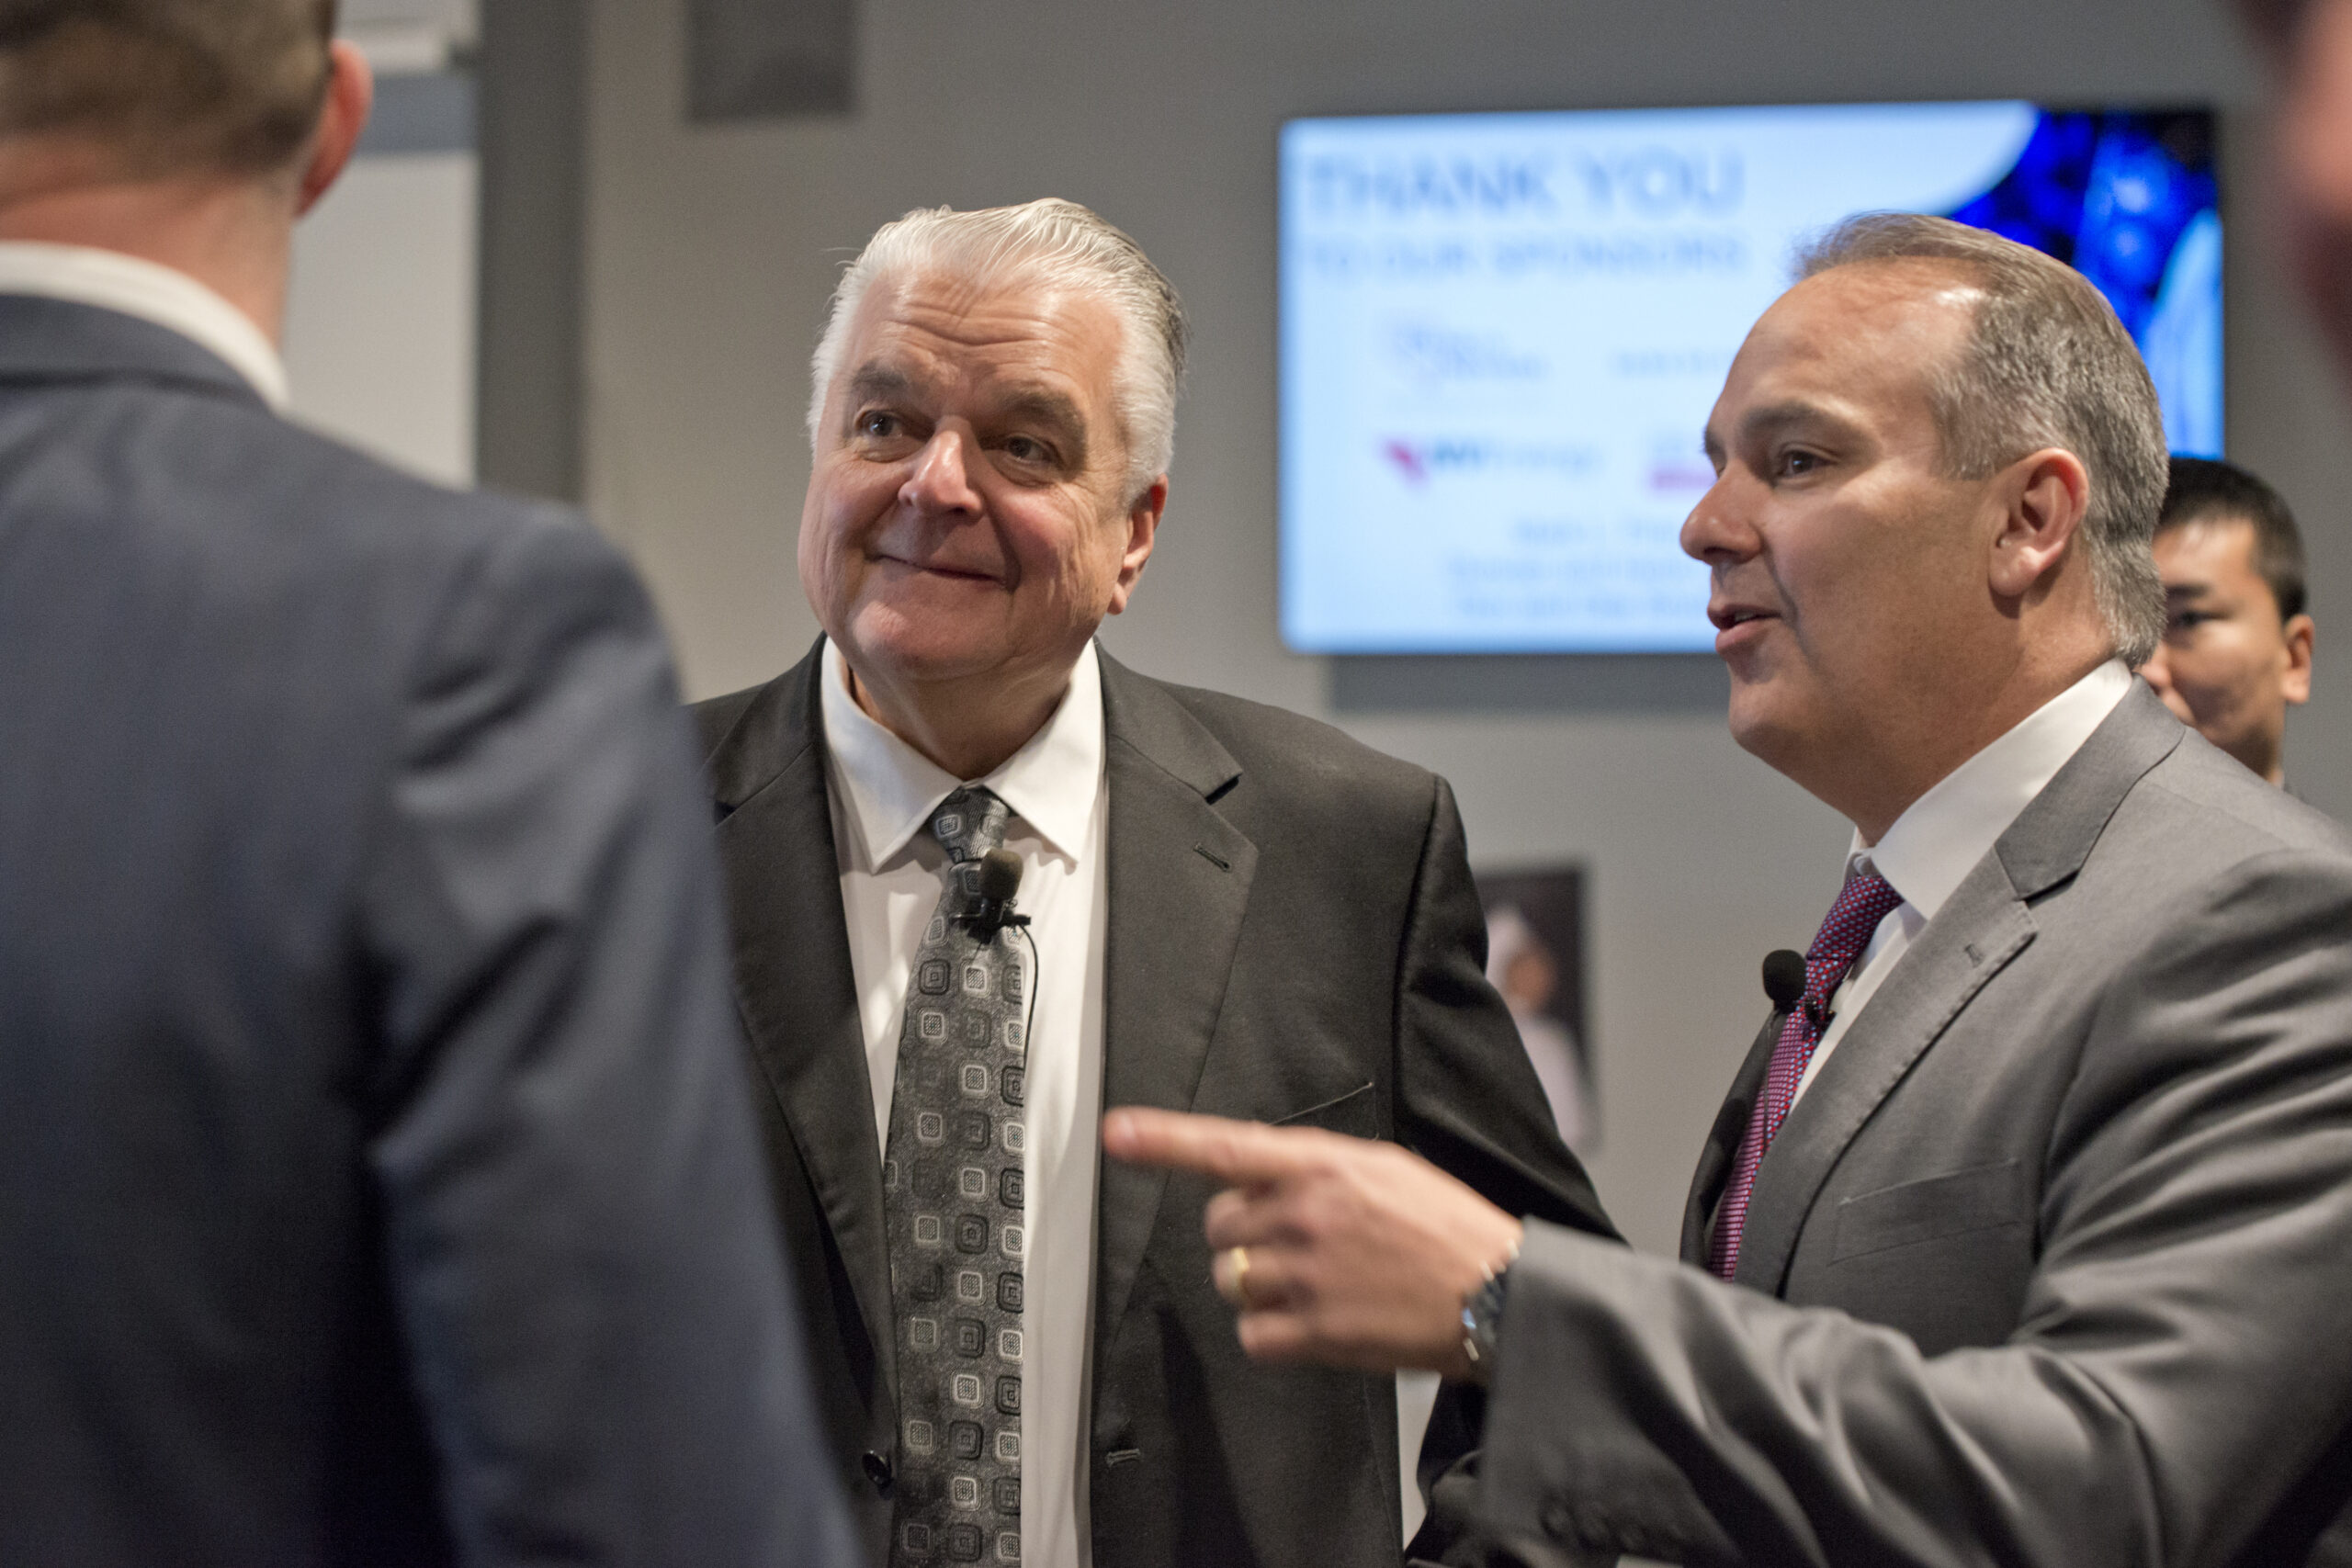 Nevada Governor Steve Sisolak and Clark County Superintendent Jesus Jara speaking with unseen person